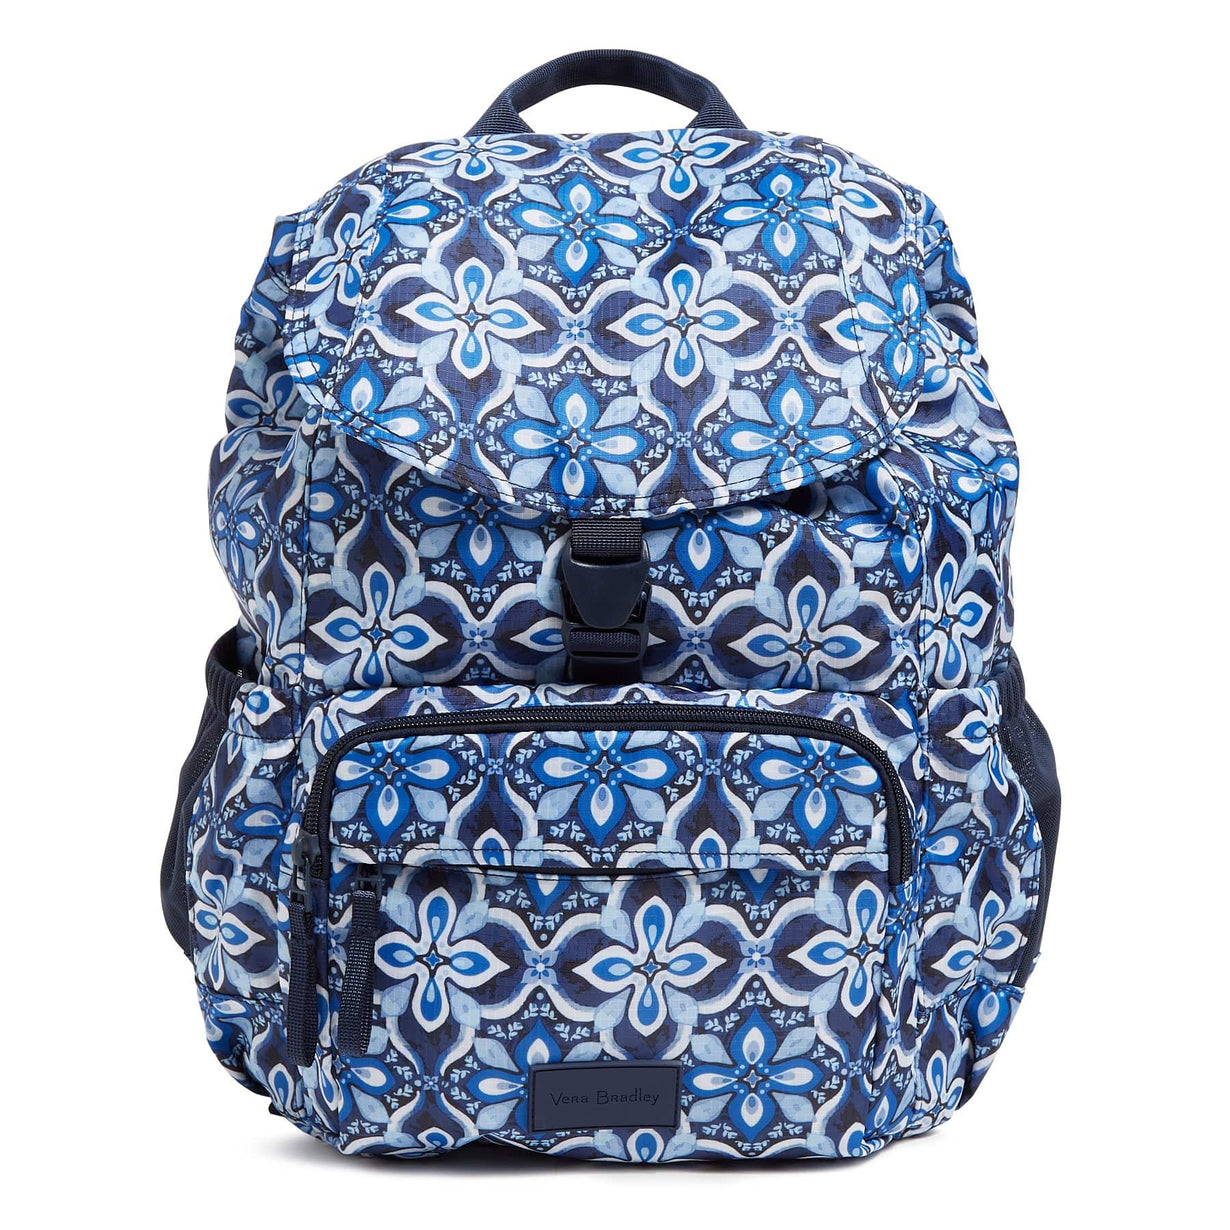 lightweight backpack for day trips with blue medallion pattern